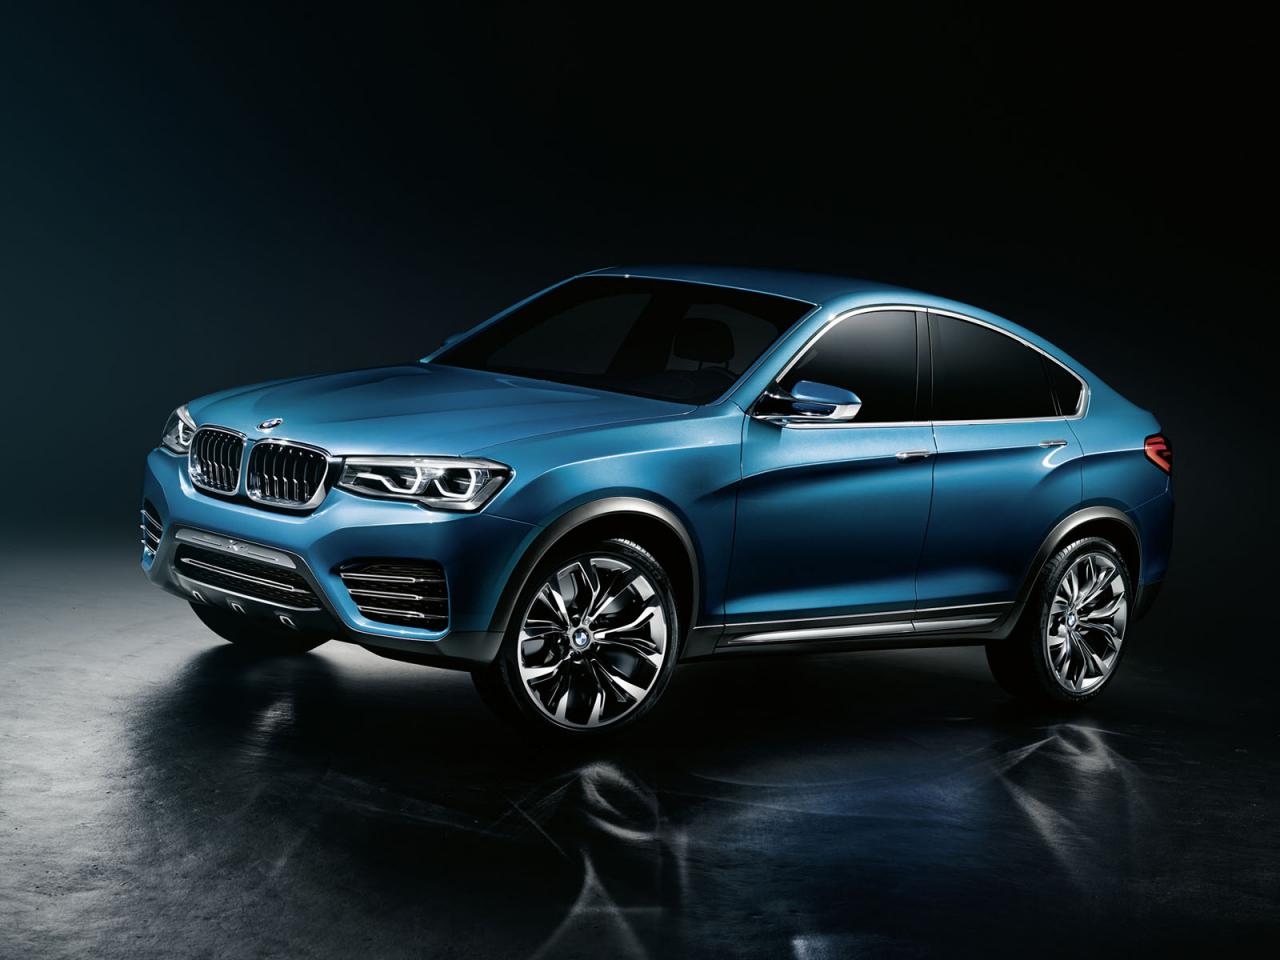 Bmw X4 Concept Ready To Dazzle At 2013 Shanghai Motor Show